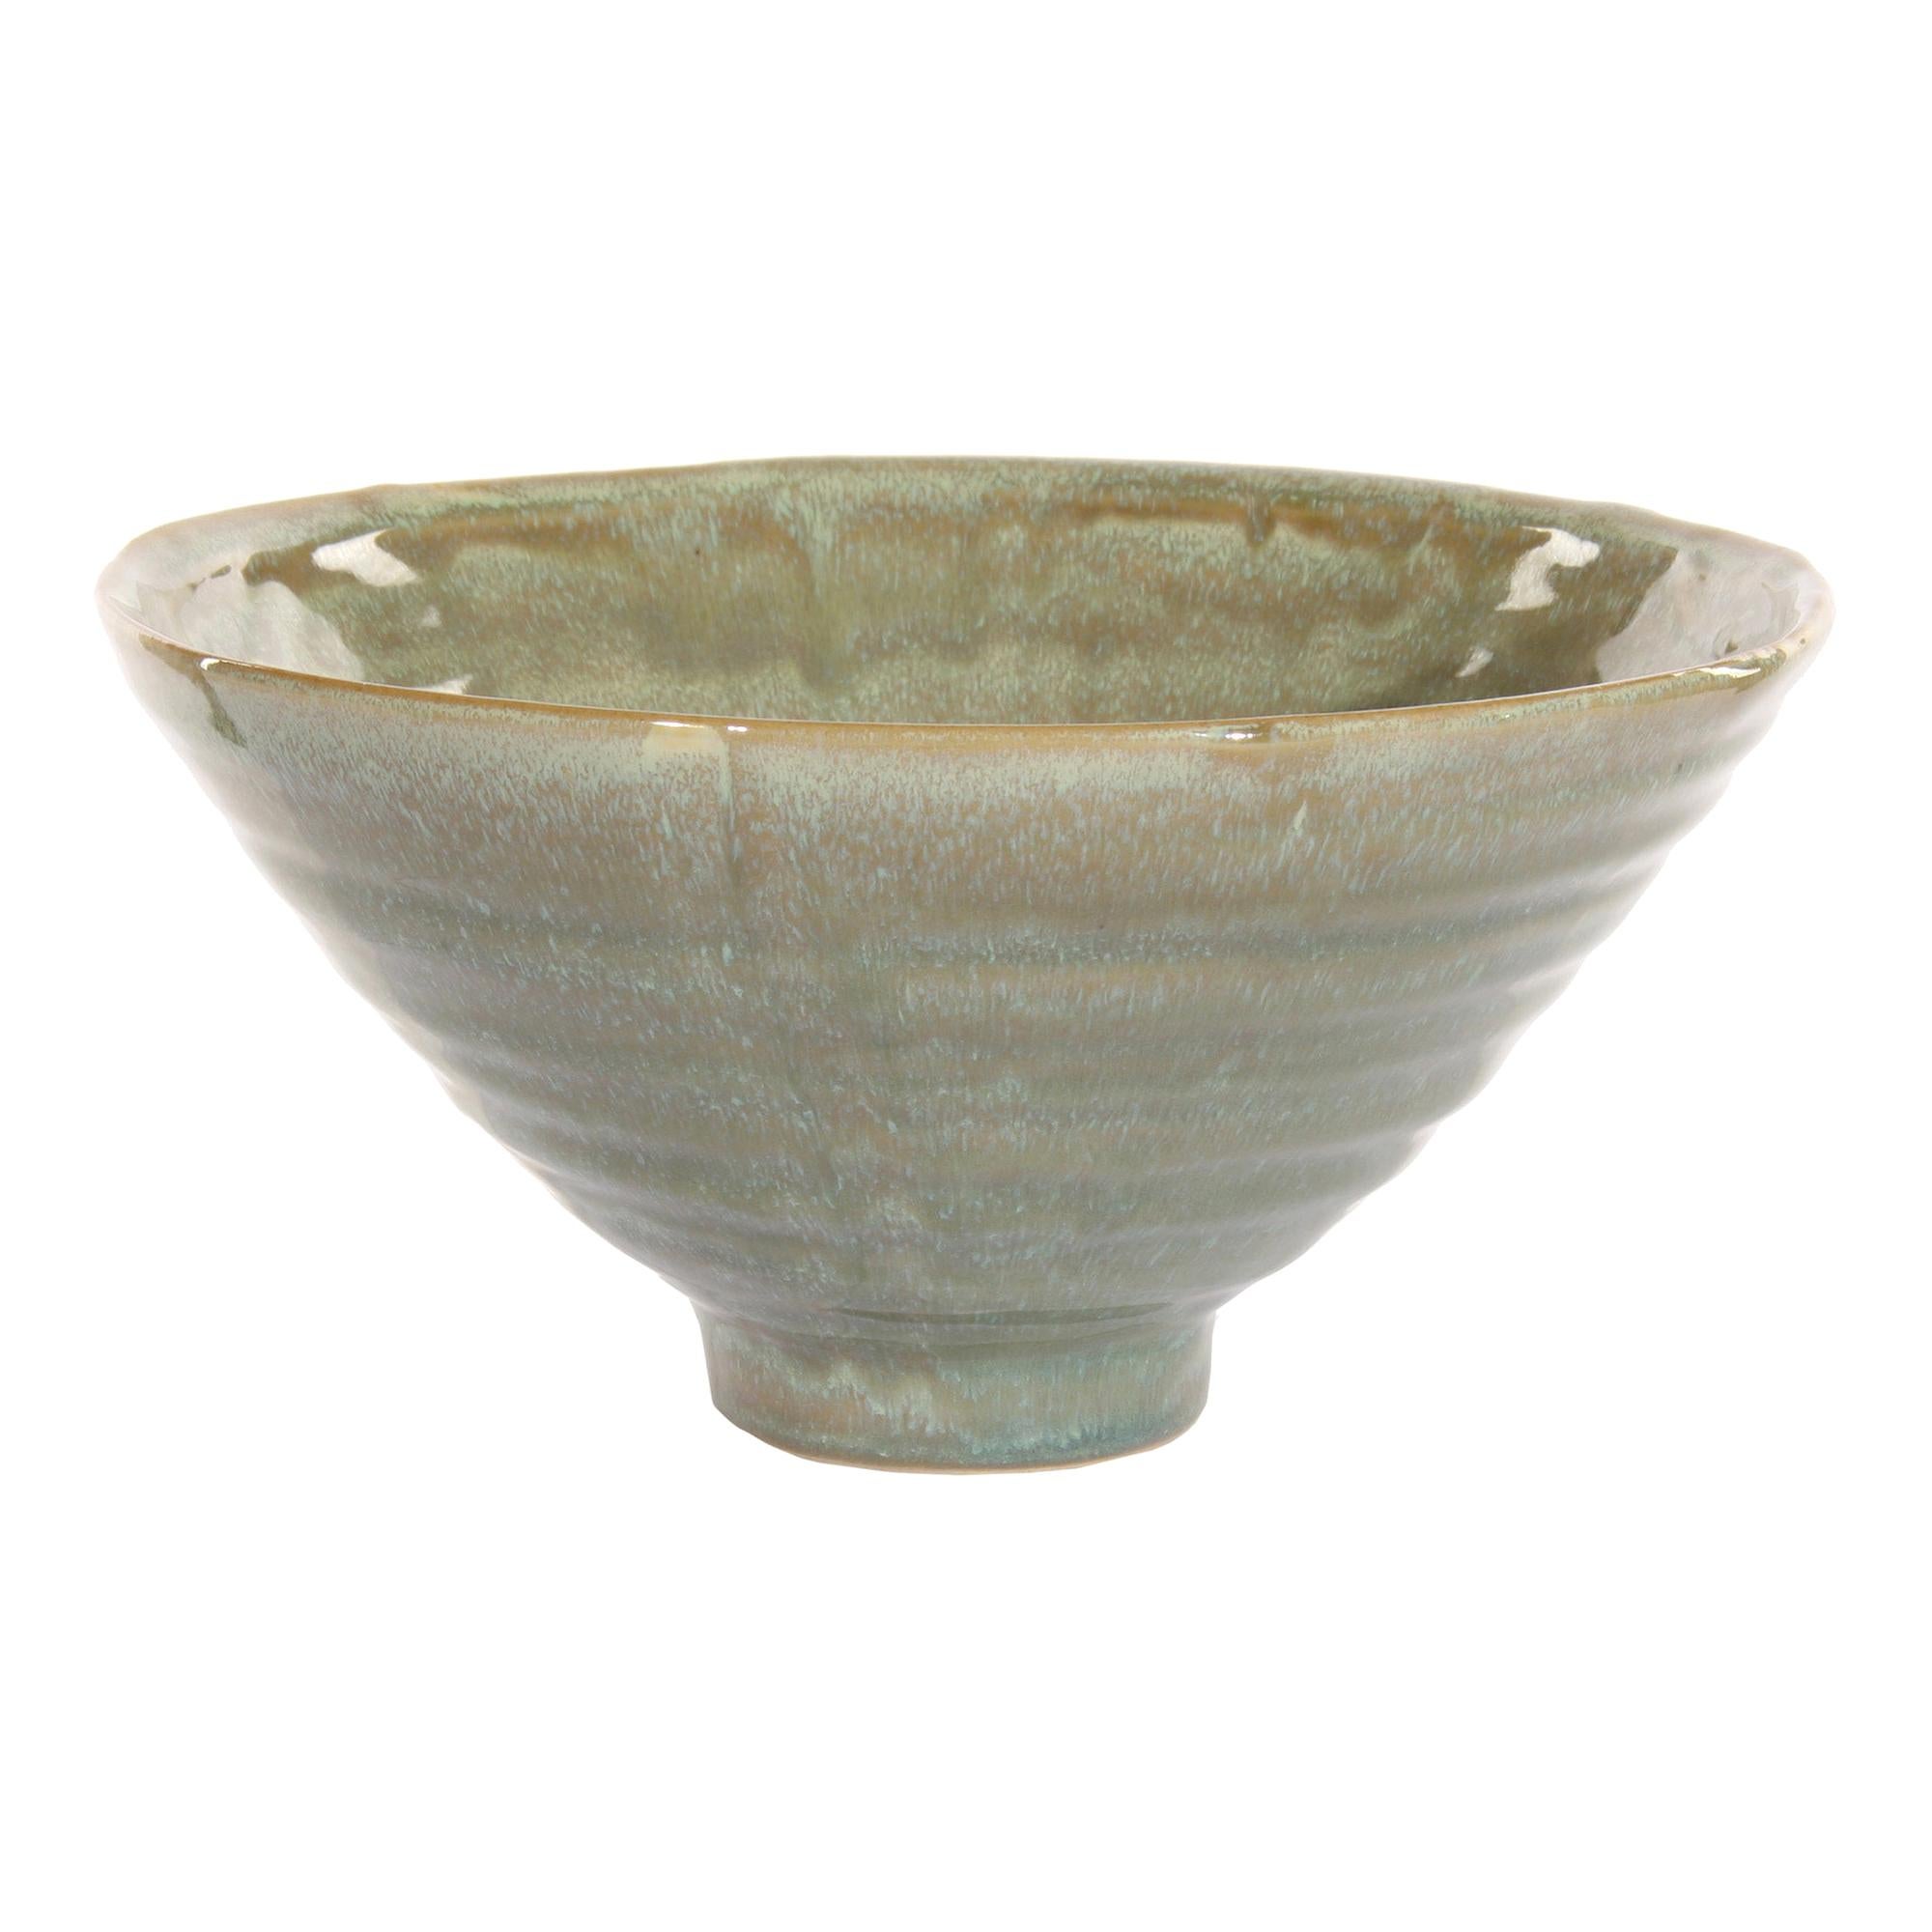 Laurel Ceramic Bowl with Light Green Glaze and Finish by CuratedKravet